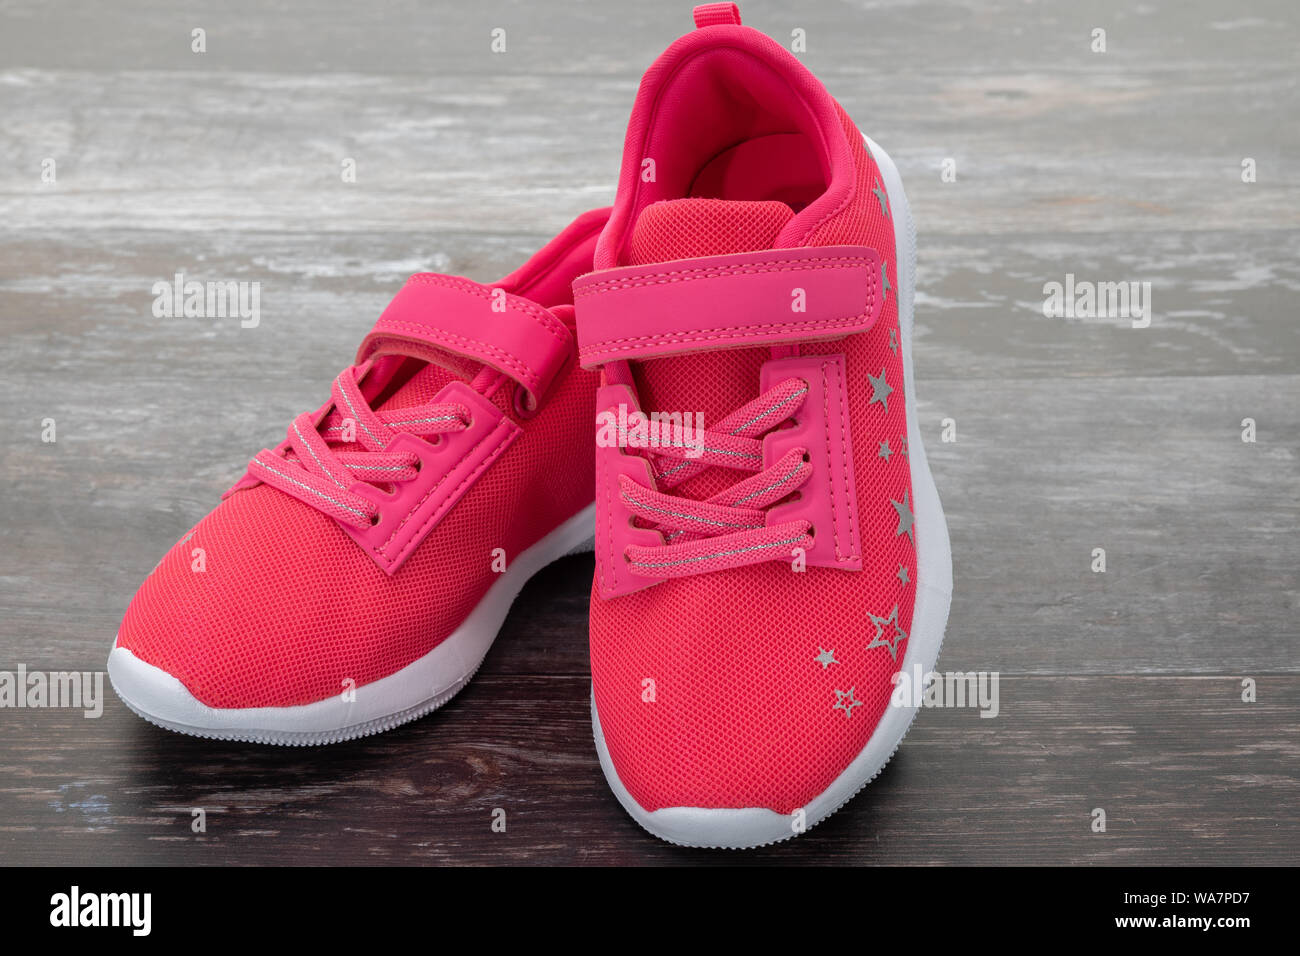 Pair of girls canvas shoes Stock Photo